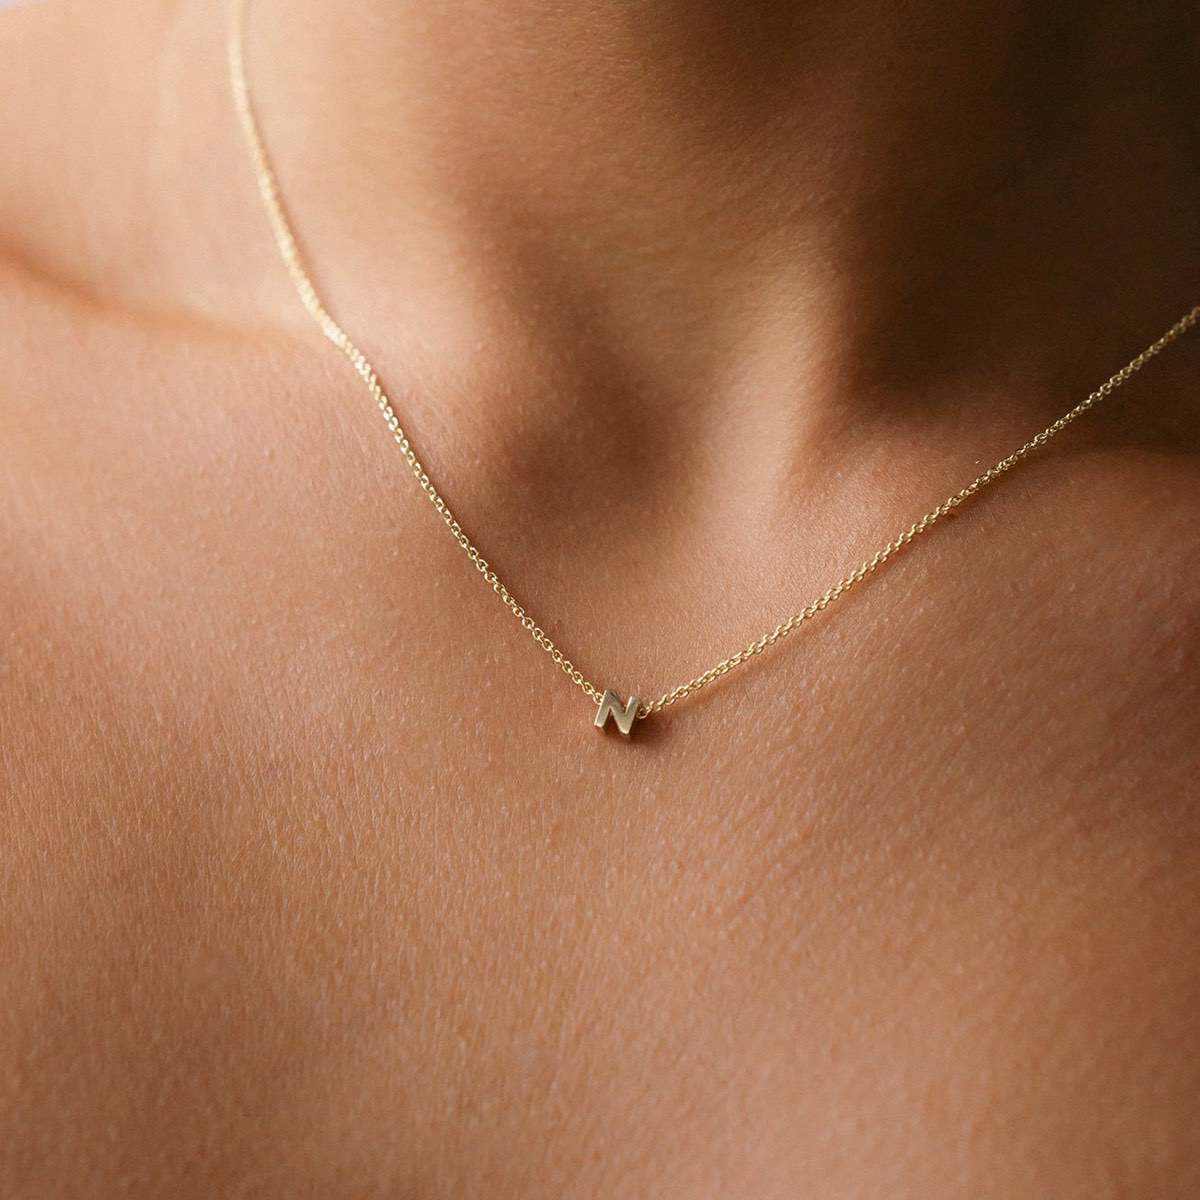 Hand finished solid gold letter necklace: Close up of a model wearing our beautiful 9ct yellow gold Tiny Letter N Charm Necklace with a 40cm cable chain